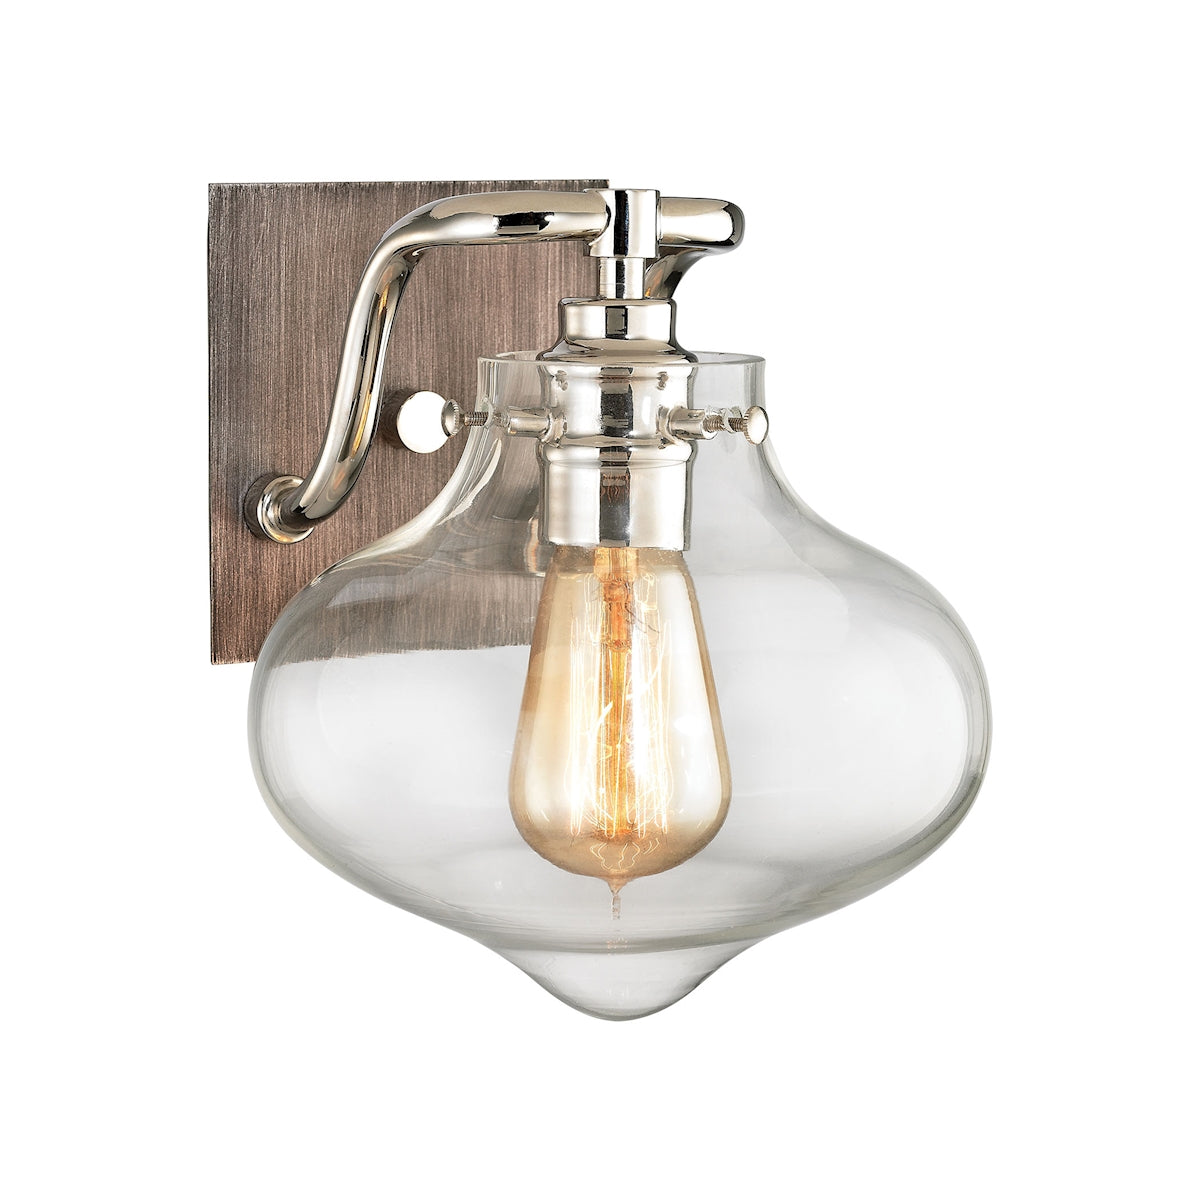 ELK Lighting 31940/1 Kelsey 1-Light Vanity Lamp in Polished Nickel and Weathered Zinc with Clear Glass